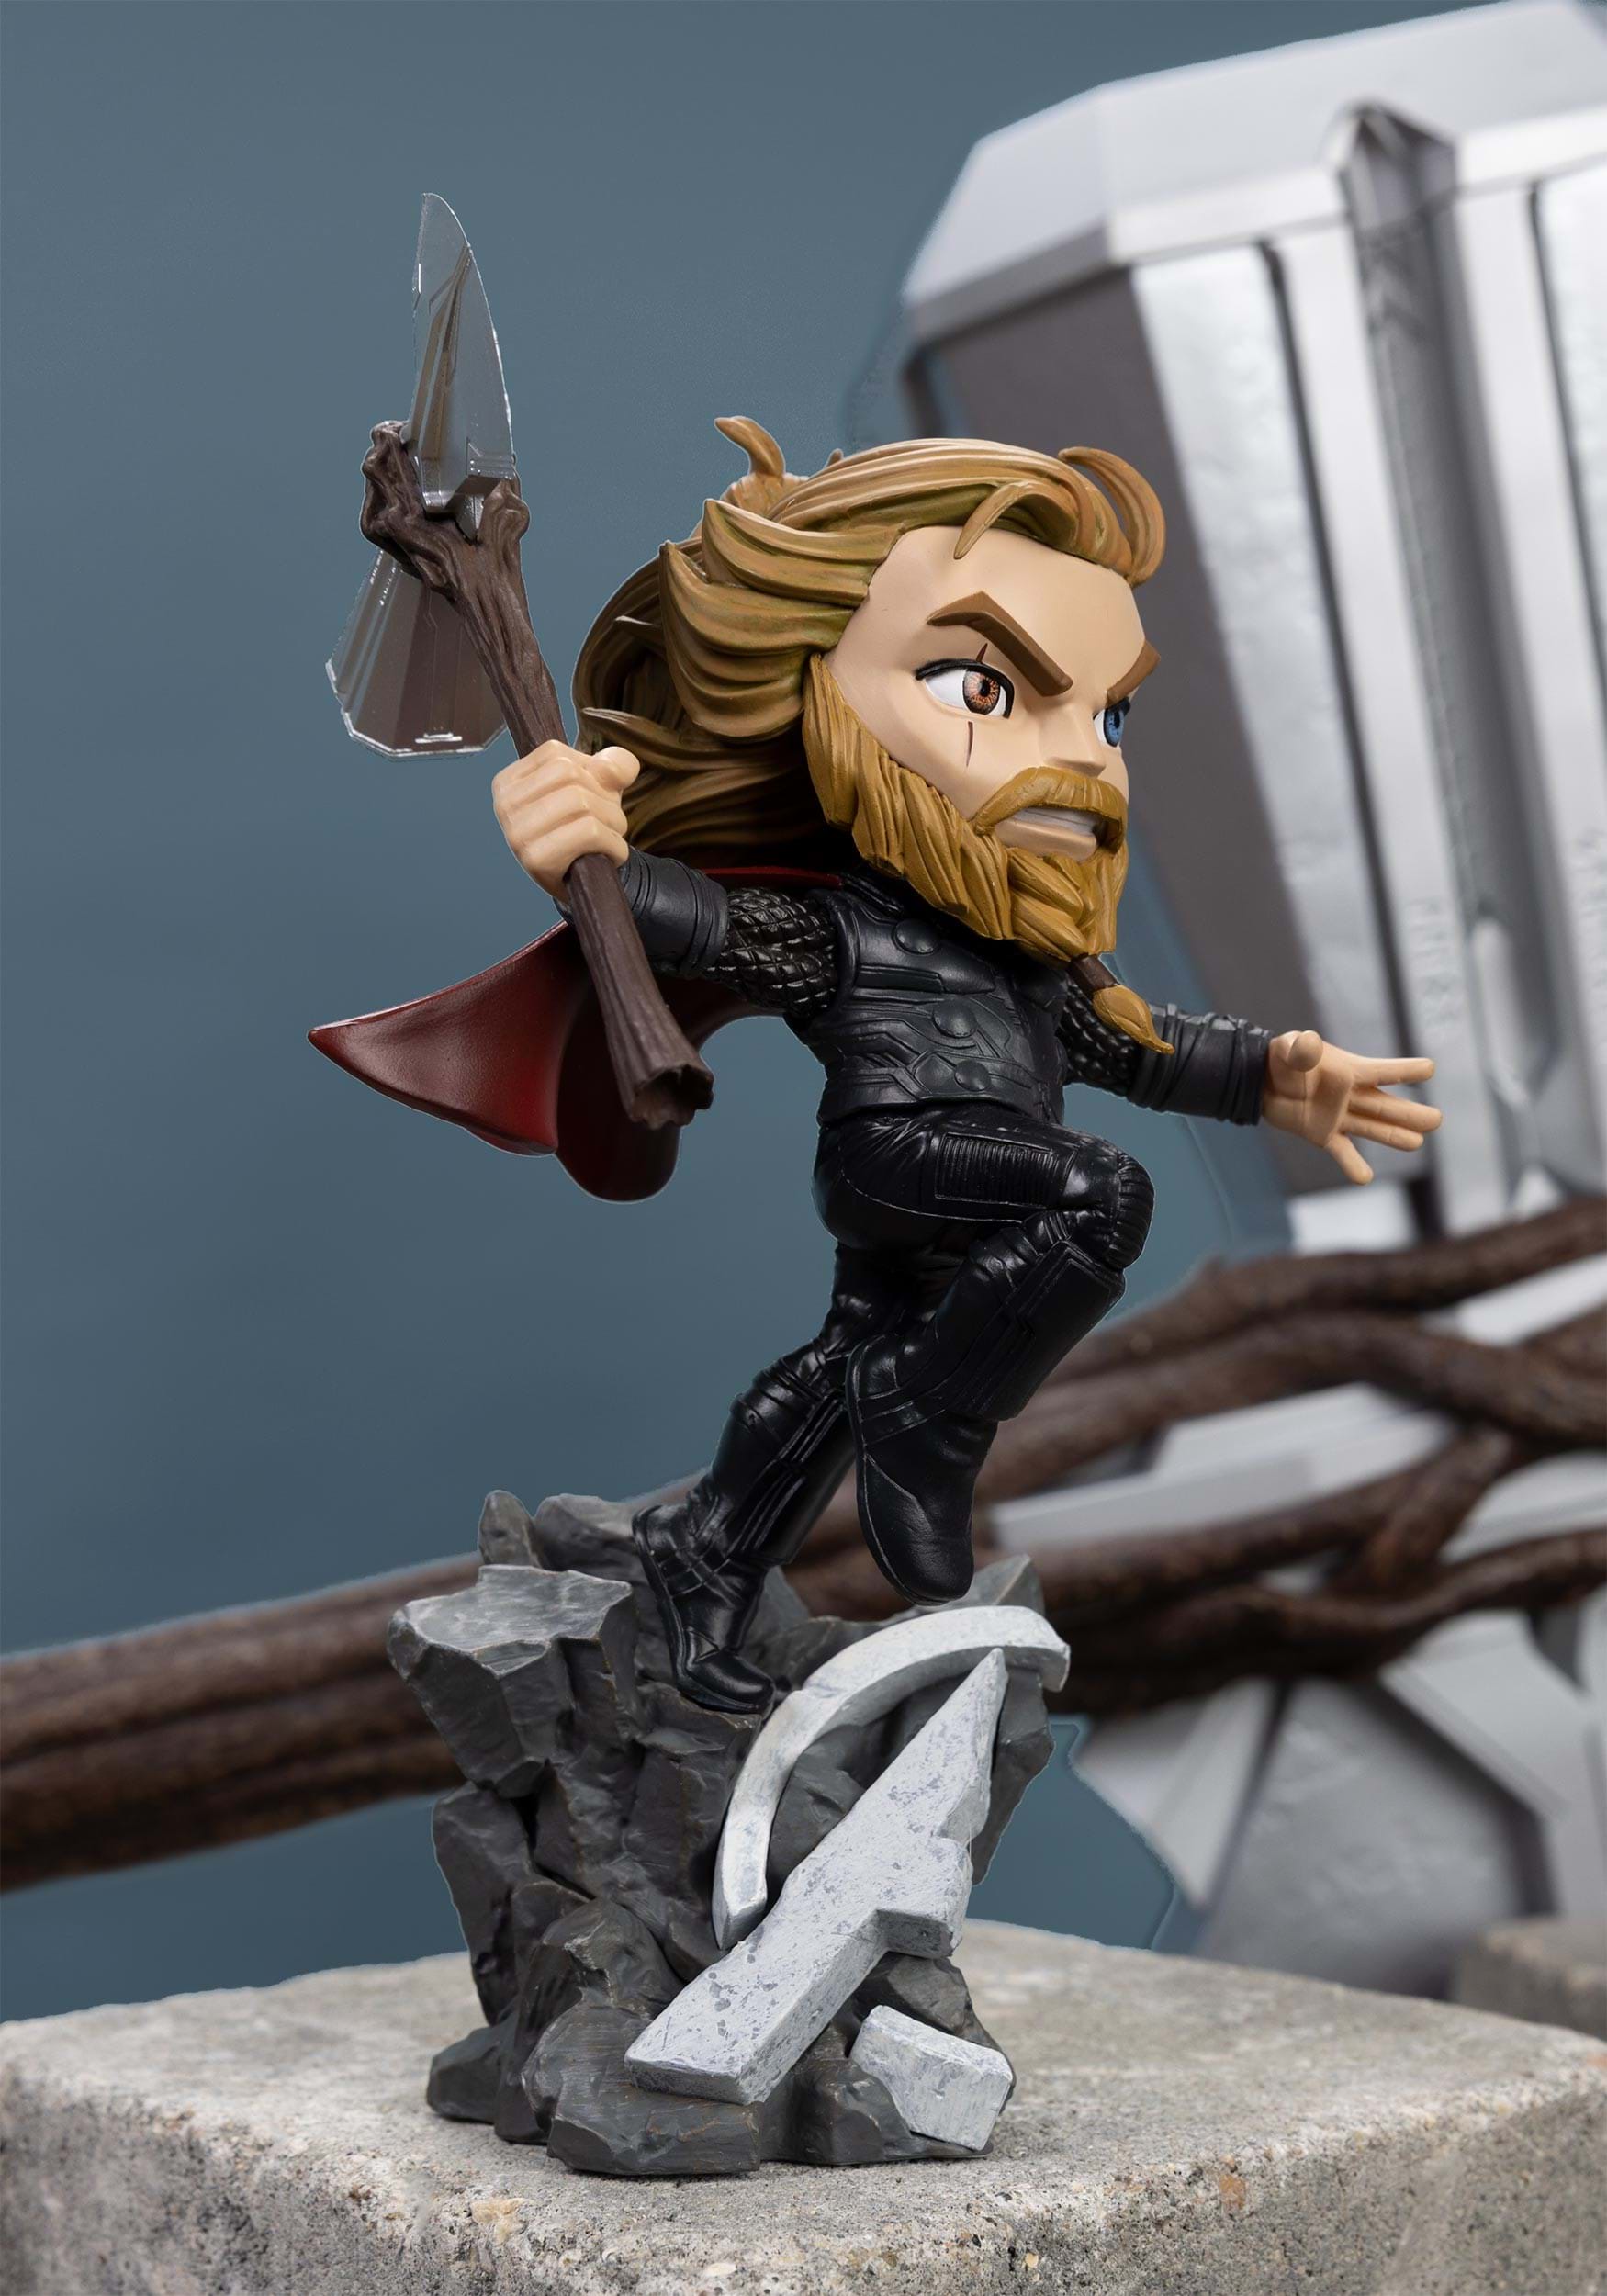 Thor Toys, Bobbleheads, Poster, T-shirts, Statues & Collectibles India